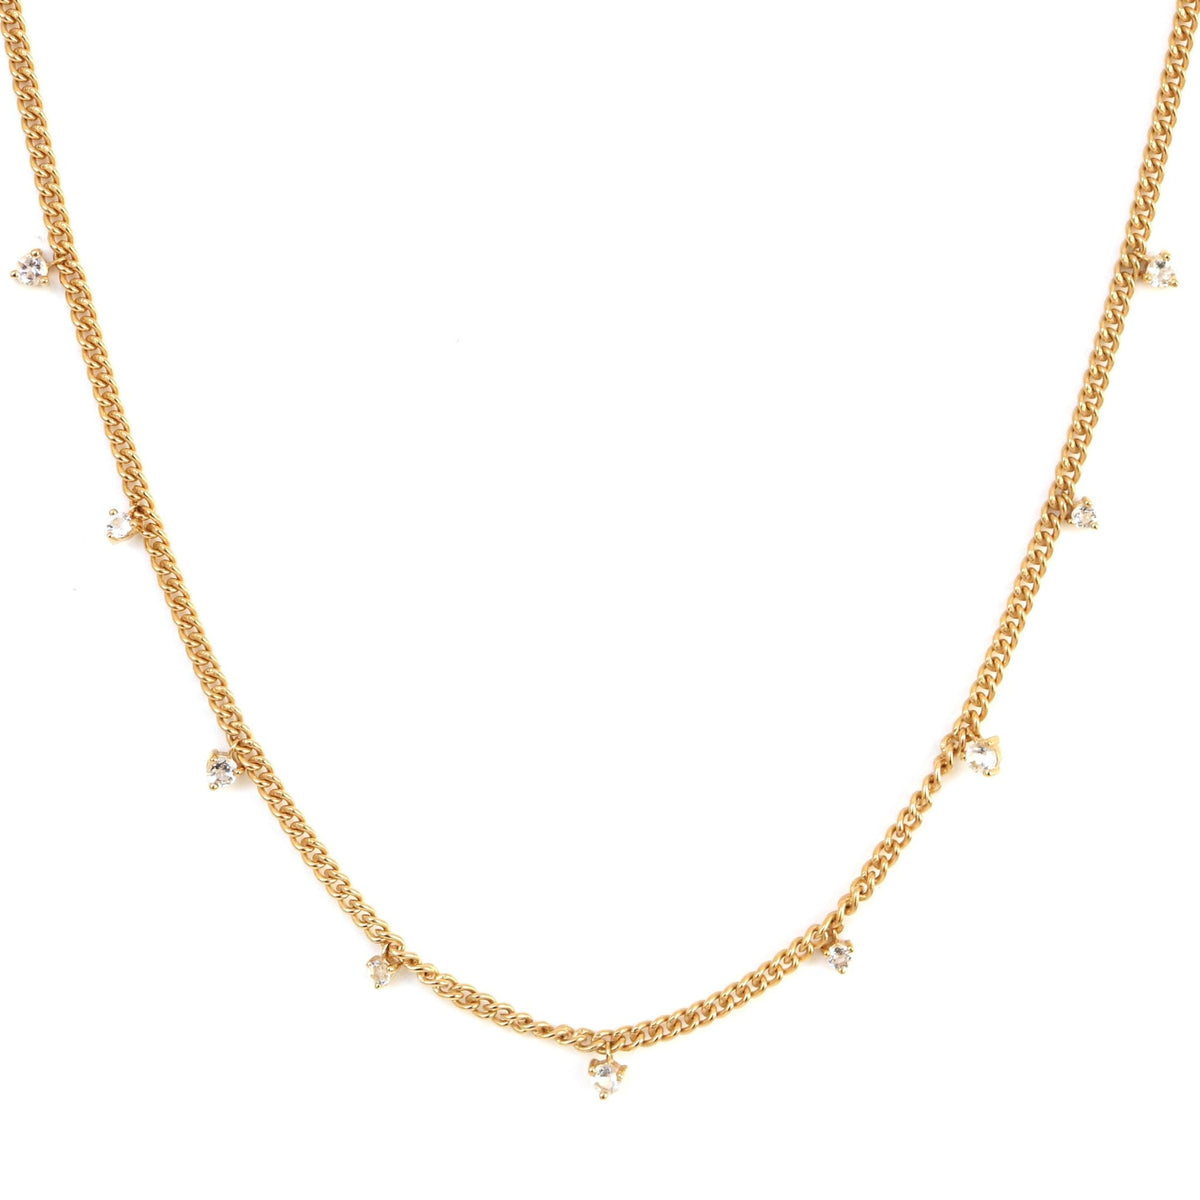 UNITY CROWN CURB LINK NECKLACE - WHITE TOPAZ &amp; GOLD - SO PRETTY CARA COTTER